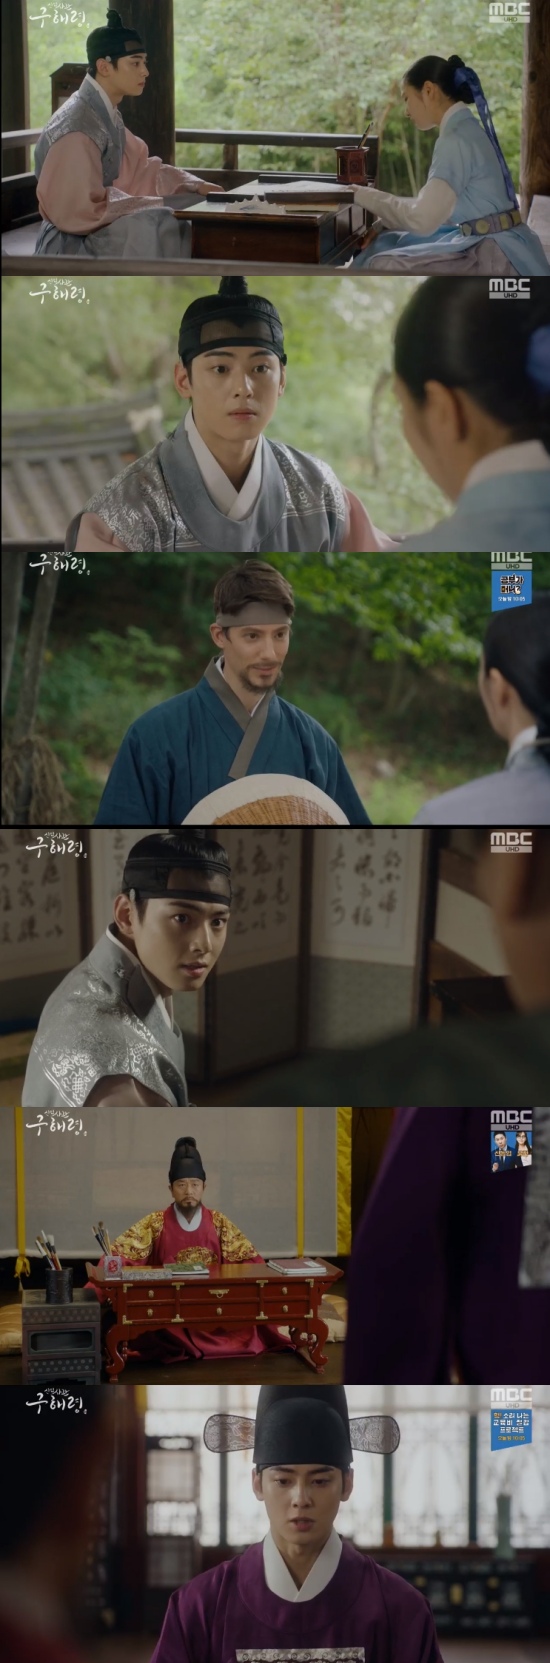 New officer Rookie Historian Goo Hae-ryung Kim Min-Sang has ordered Cha Eun-woo to marry.In the 27th and 28th episodes of MBCs New Entrepreneur Rookie Historian Goo Hae-ryung broadcast on the 29th, Lee Lim (Cha Eun-woo) confessed that he had hidden a foreigner (Fabian) from Kim Min-Sang.On this day, Irim was in trouble when he was put in Danger on the day of the discovery that he hid the game, and Rookie Historian Goo Hae-ryung set up a trick to escape.He left a letter to Rookie Historian Goo Hae-ryung and ran alone, and the letter contained the fact that he came to Joseon to find his brother, along with the fact that he was not a merchant.In particular, Irim knew that those who hid him were punished, and decided to reveal the truth to Kim Min-Sang.Heo Sam-bo (Sung Ji-ru) dissuaded I-rim, and I-rim said, If I dont do anything, seventy-three people die.Is it saying that my one comfort is more important than the lives of many people? Furthermore, Irim said, I spent my life hiding quietly in the melted hall.I will not live like that anymore, Rookie Historian Goo Hae-ryung said, Let me go with you.Irim went straight to Itae and said, I am the one I am looking for in the money department. I helped the transferee.Rookie Historian Goo Hae-ryung recorded the conversation between Irim and Itae, and Itae was angry at Irim without worrying that Rookie Historian Goo Hae-ryung was there.Fortunately, with the help of Lee Jin (Park Ki-woong) and Cho Dae-im (Kim Yeo-jin), Irim escaped Danger; Rookie Historian Goo Hae-ryung later said, Are you okay?I was worried, and Irim said, Its not okay. Do you comfort me if I say this? Its okay. Just read a book and think about it. Irim asked, Please tell me I did well, I think I just need to say that. Rookie Historian Goo Hae-ryung approached Irim.Rookie Historian Goo Hae-ryung tapped Lee Lims shoulder and said, You did well.In addition, Itae raised the tension of the drama by calling for the marriage of Lee Lim.Photo = MBC Broadcasting Screen